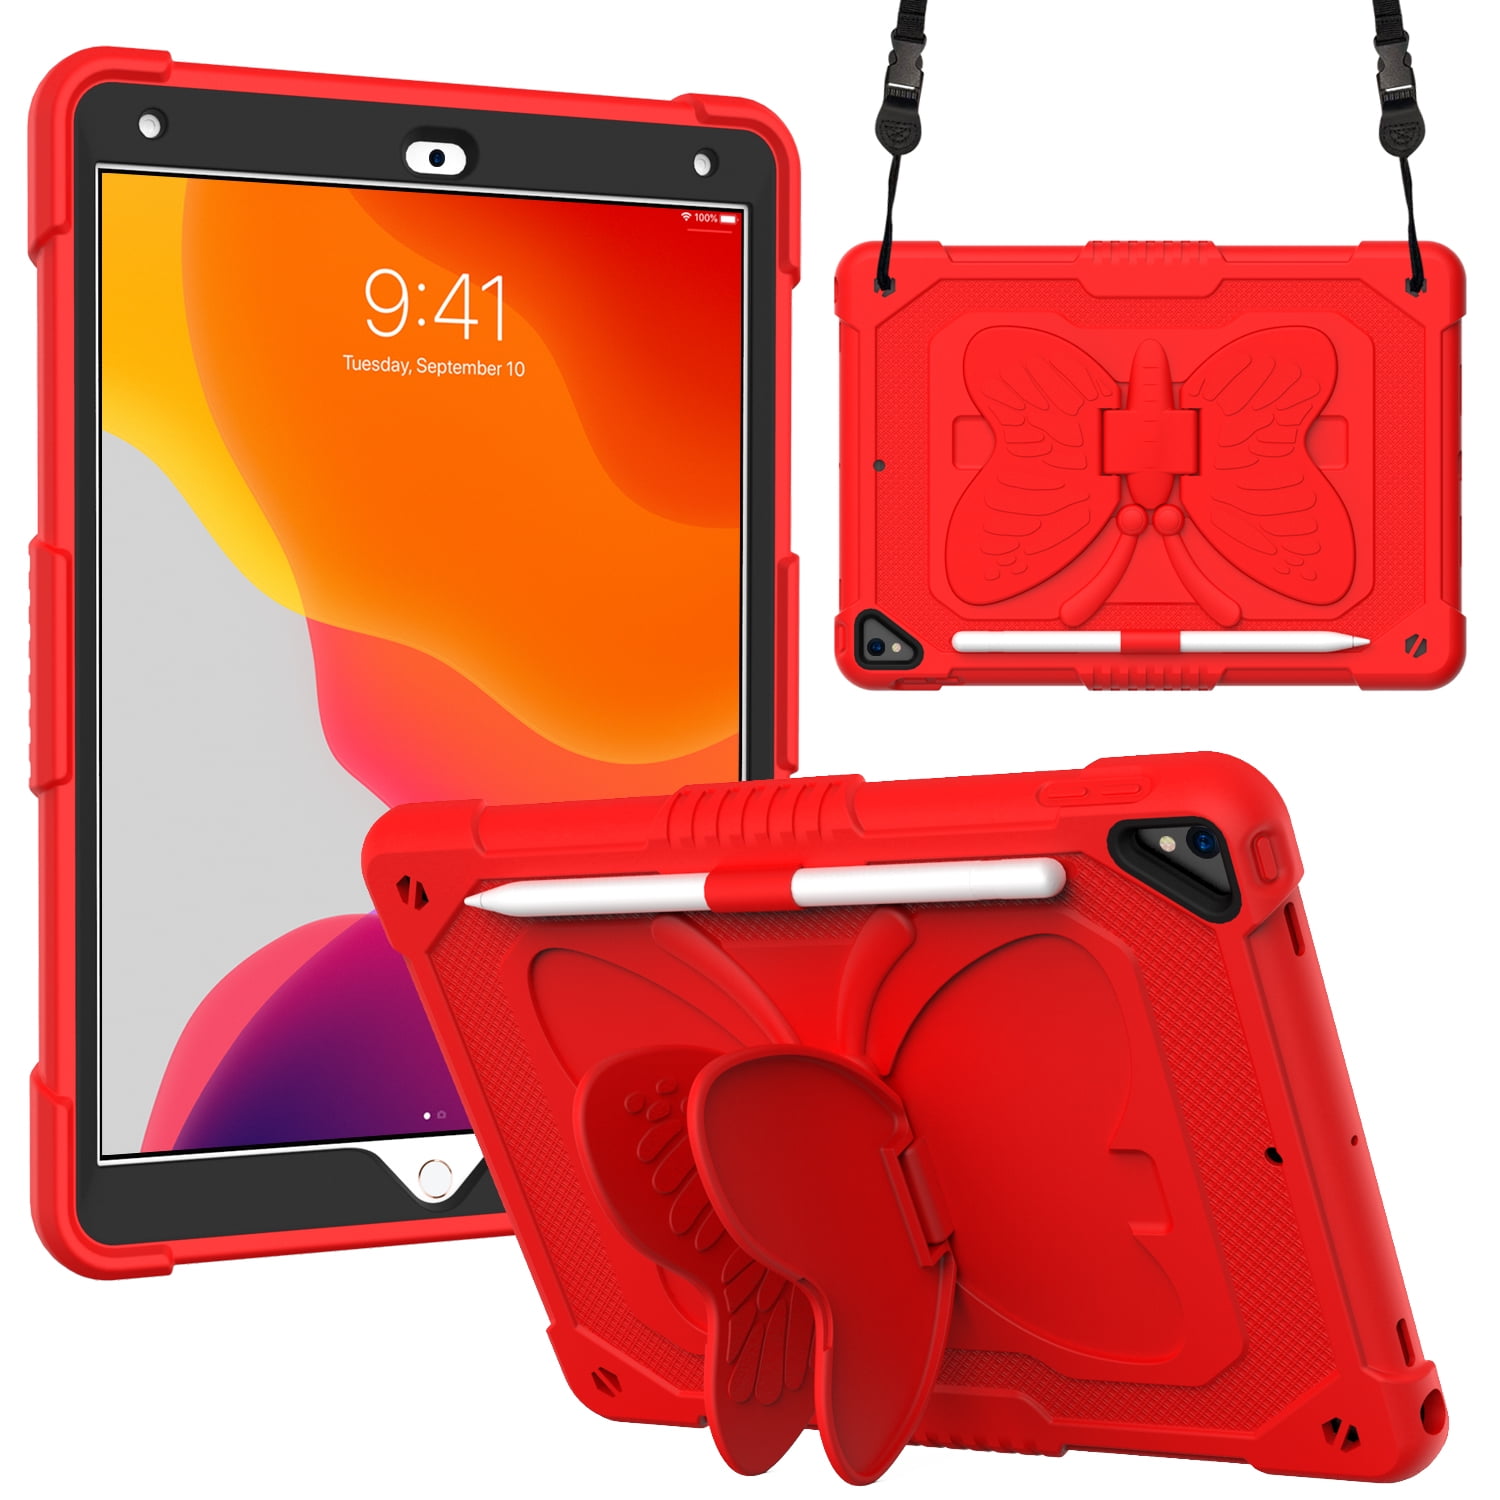 The 10 Best iPad Mini Cases and Covers for Kids - HubPages